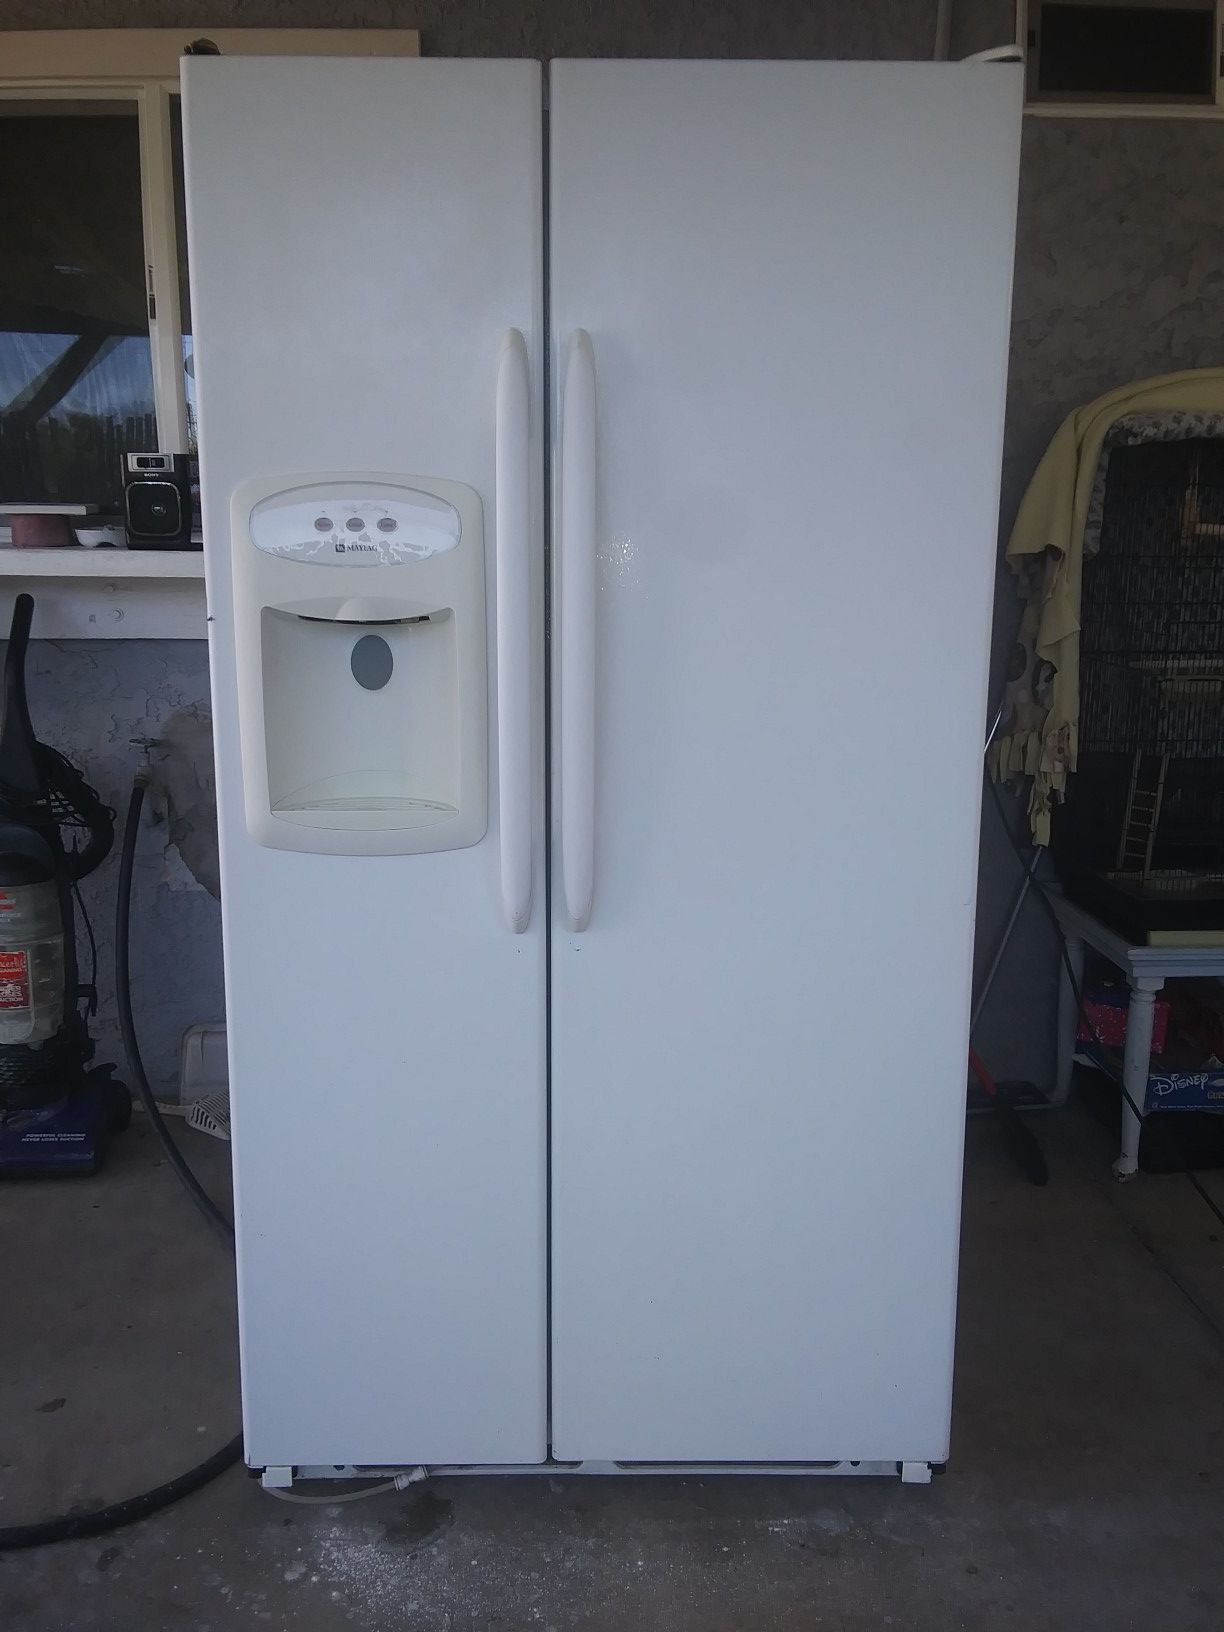 Maytag side-by-side refrigerator / freezer. WORKS LIKE NEW... VERY CLEAN! 26 total Cubic Feet of food storage space!